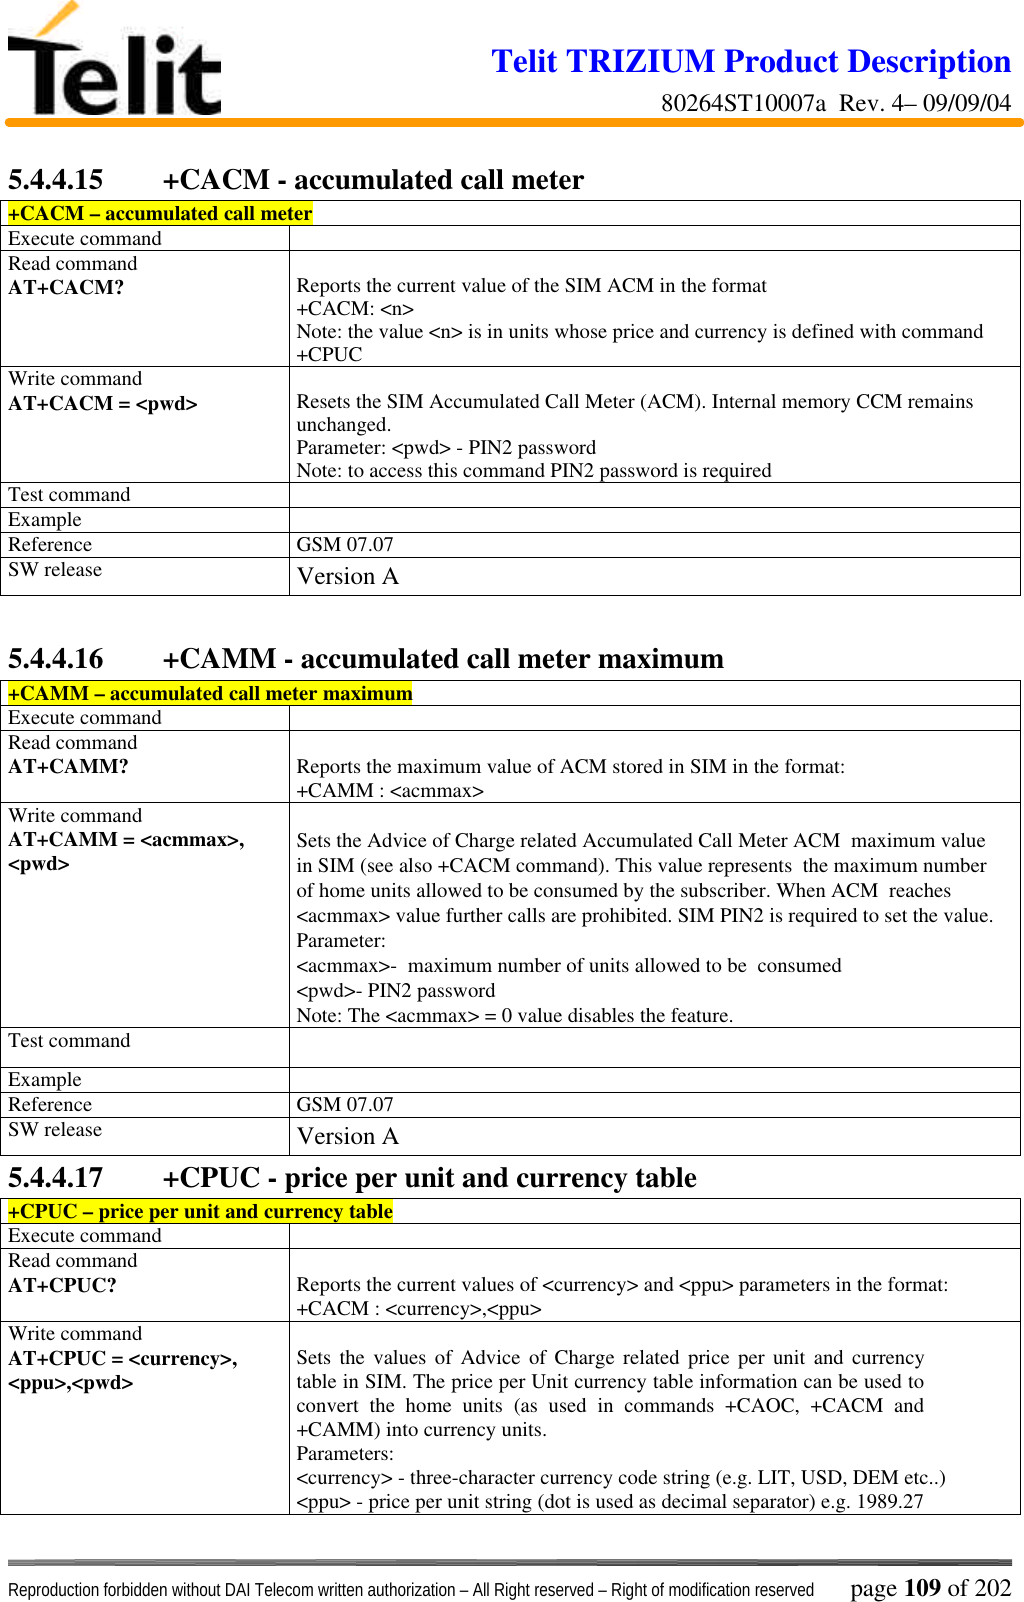 Telit TRIZIUM Product Description80264ST10007a  Rev. 4– 09/09/04Reproduction forbidden without DAI Telecom written authorization – All Right reserved – Right of modification reserved page 109 of 2025.4.4.15  +CACM - accumulated call meter+CACM – accumulated call meterExecute commandRead commandAT+CACM? Reports the current value of the SIM ACM in the format+CACM: &lt;n&gt;Note: the value &lt;n&gt; is in units whose price and currency is defined with command+CPUCWrite commandAT+CACM = &lt;pwd&gt; Resets the SIM Accumulated Call Meter (ACM). Internal memory CCM remainsunchanged.Parameter: &lt;pwd&gt; - PIN2 passwordNote: to access this command PIN2 password is requiredTest commandExampleReference GSM 07.07SW release Version A5.4.4.16  +CAMM - accumulated call meter maximum+CAMM – accumulated call meter maximumExecute commandRead commandAT+CAMM? Reports the maximum value of ACM stored in SIM in the format:+CAMM : &lt;acmmax&gt;Write commandAT+CAMM = &lt;acmmax&gt;,&lt;pwd&gt; Sets the Advice of Charge related Accumulated Call Meter ACM  maximum valuein SIM (see also +CACM command). This value represents  the maximum numberof home units allowed to be consumed by the subscriber. When ACM  reaches&lt;acmmax&gt; value further calls are prohibited. SIM PIN2 is required to set the value.Parameter:&lt;acmmax&gt;-  maximum number of units allowed to be  consumed&lt;pwd&gt;- PIN2 passwordNote: The &lt;acmmax&gt; = 0 value disables the feature.Test commandExampleReference GSM 07.07SW release Version A5.4.4.17  +CPUC - price per unit and currency table+CPUC – price per unit and currency tableExecute commandRead commandAT+CPUC? Reports the current values of &lt;currency&gt; and &lt;ppu&gt; parameters in the format:+CACM : &lt;currency&gt;,&lt;ppu&gt;Write commandAT+CPUC = &lt;currency&gt;,&lt;ppu&gt;,&lt;pwd&gt; Sets the values of Advice of Charge related price per unit and currencytable in SIM. The price per Unit currency table information can be used toconvert the home units (as used in commands +CAOC, +CACM and+CAMM) into currency units.Parameters:&lt;currency&gt; - three-character currency code string (e.g. LIT, USD, DEM etc..)&lt;ppu&gt; - price per unit string (dot is used as decimal separator) e.g. 1989.27